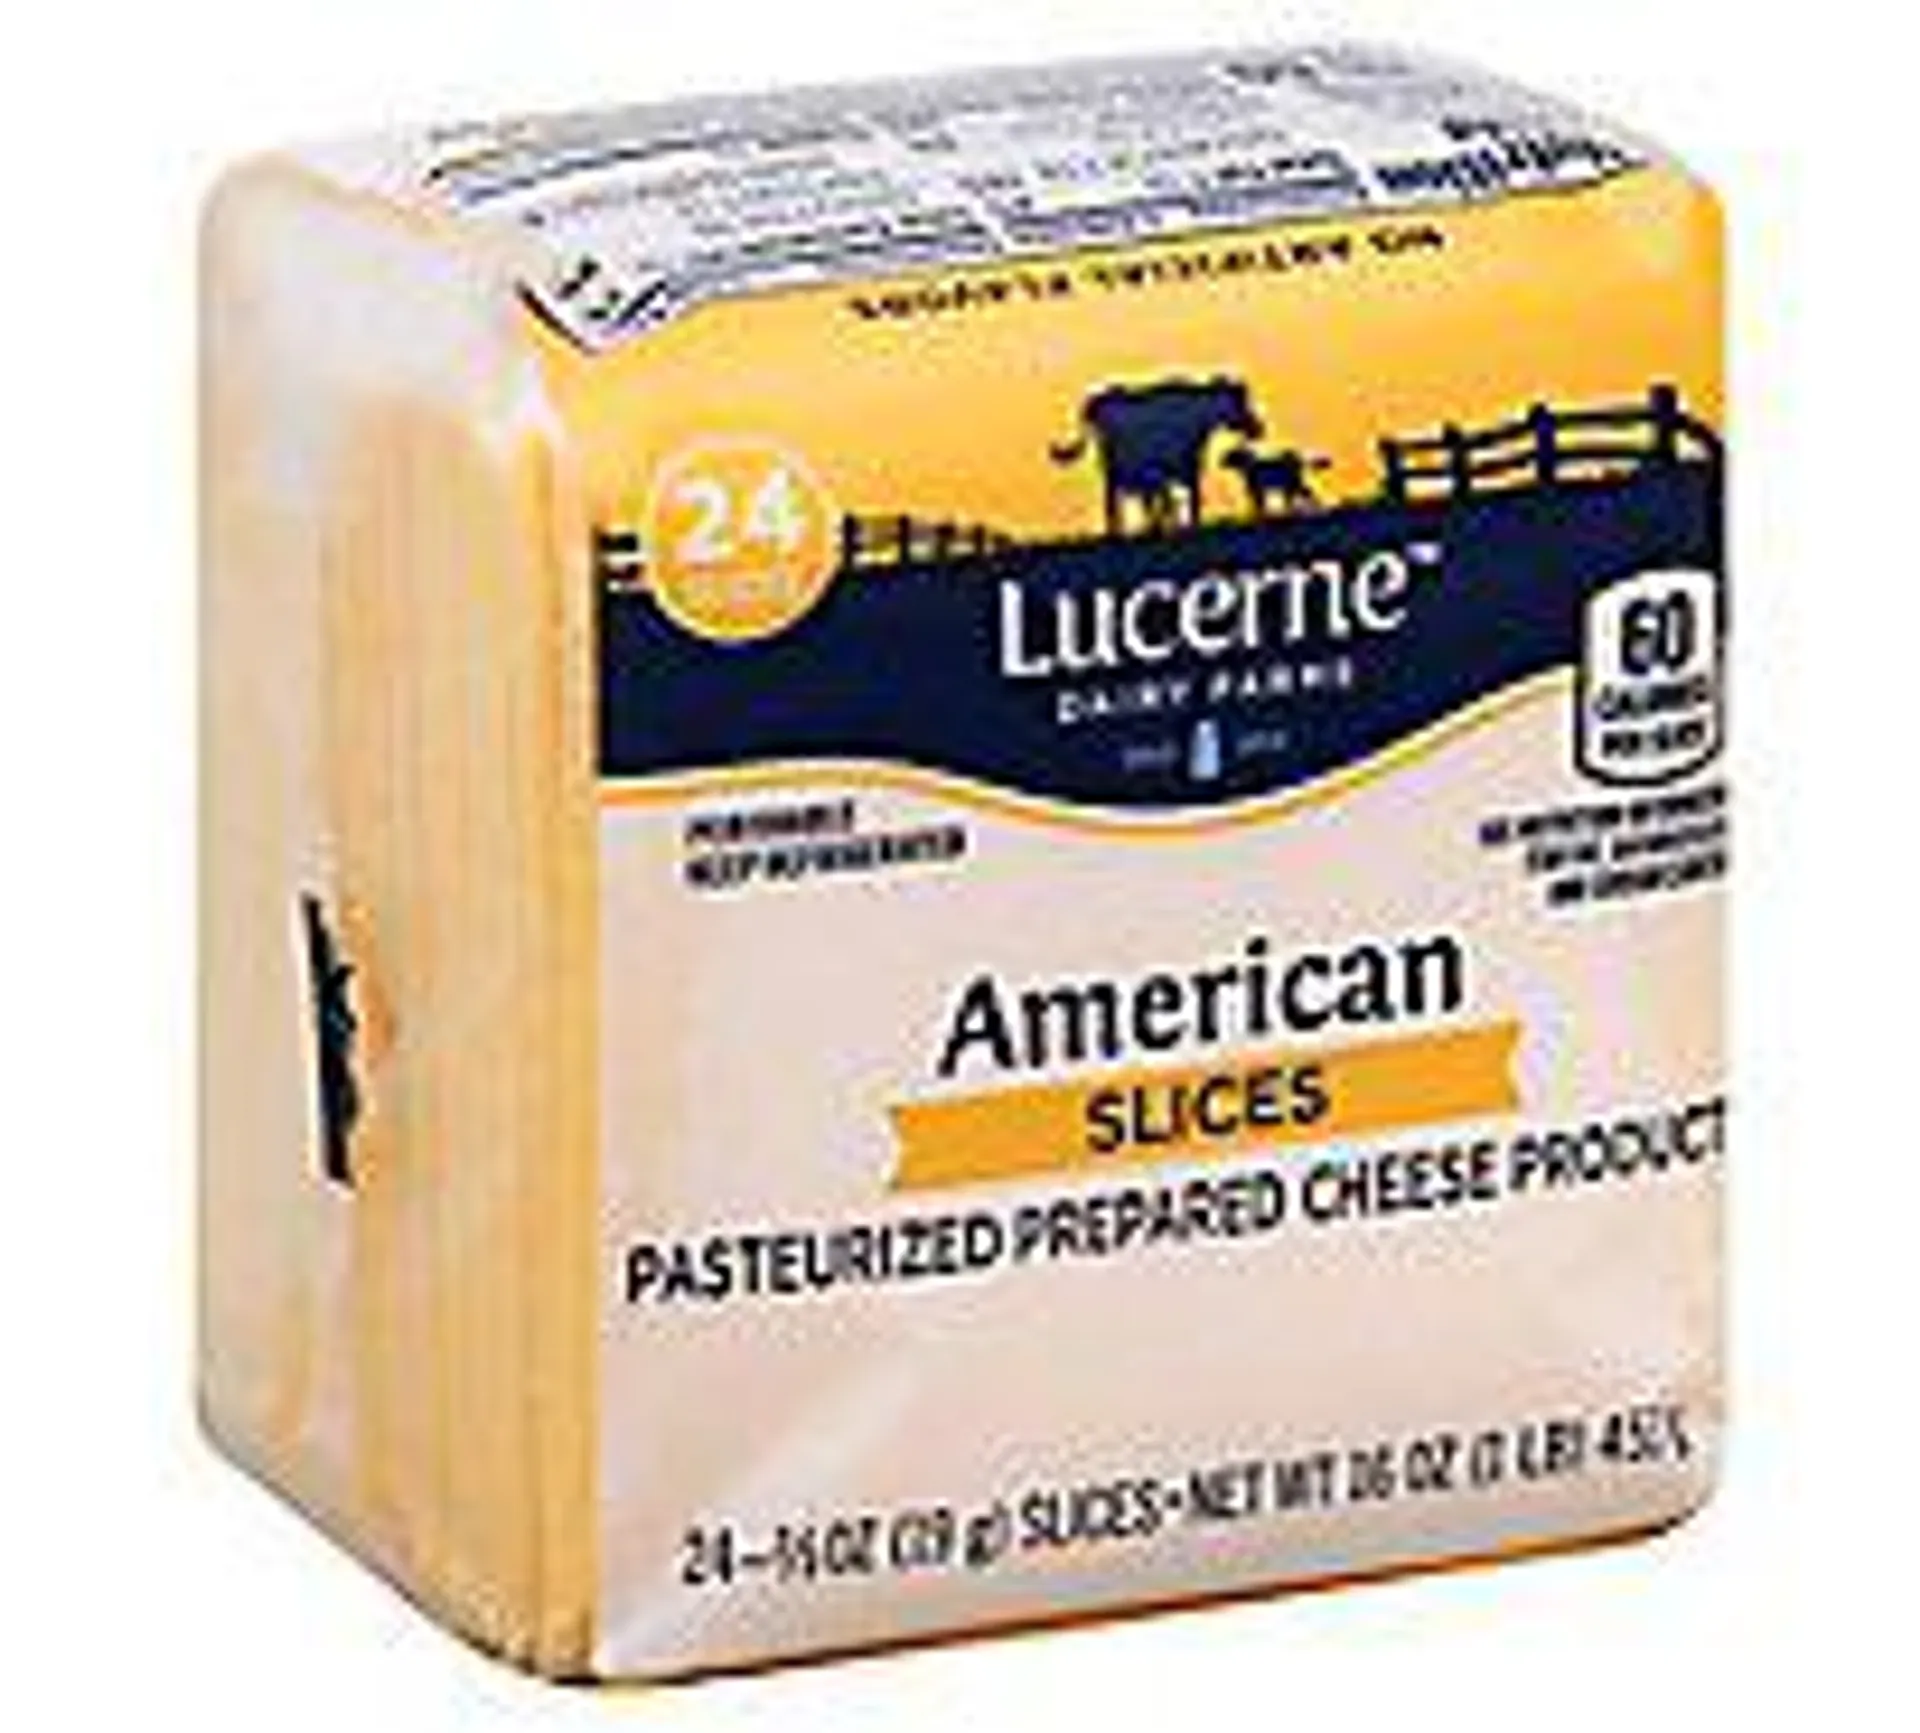 Lucerne Cheese Slices American - 24 - 0.67 Oz